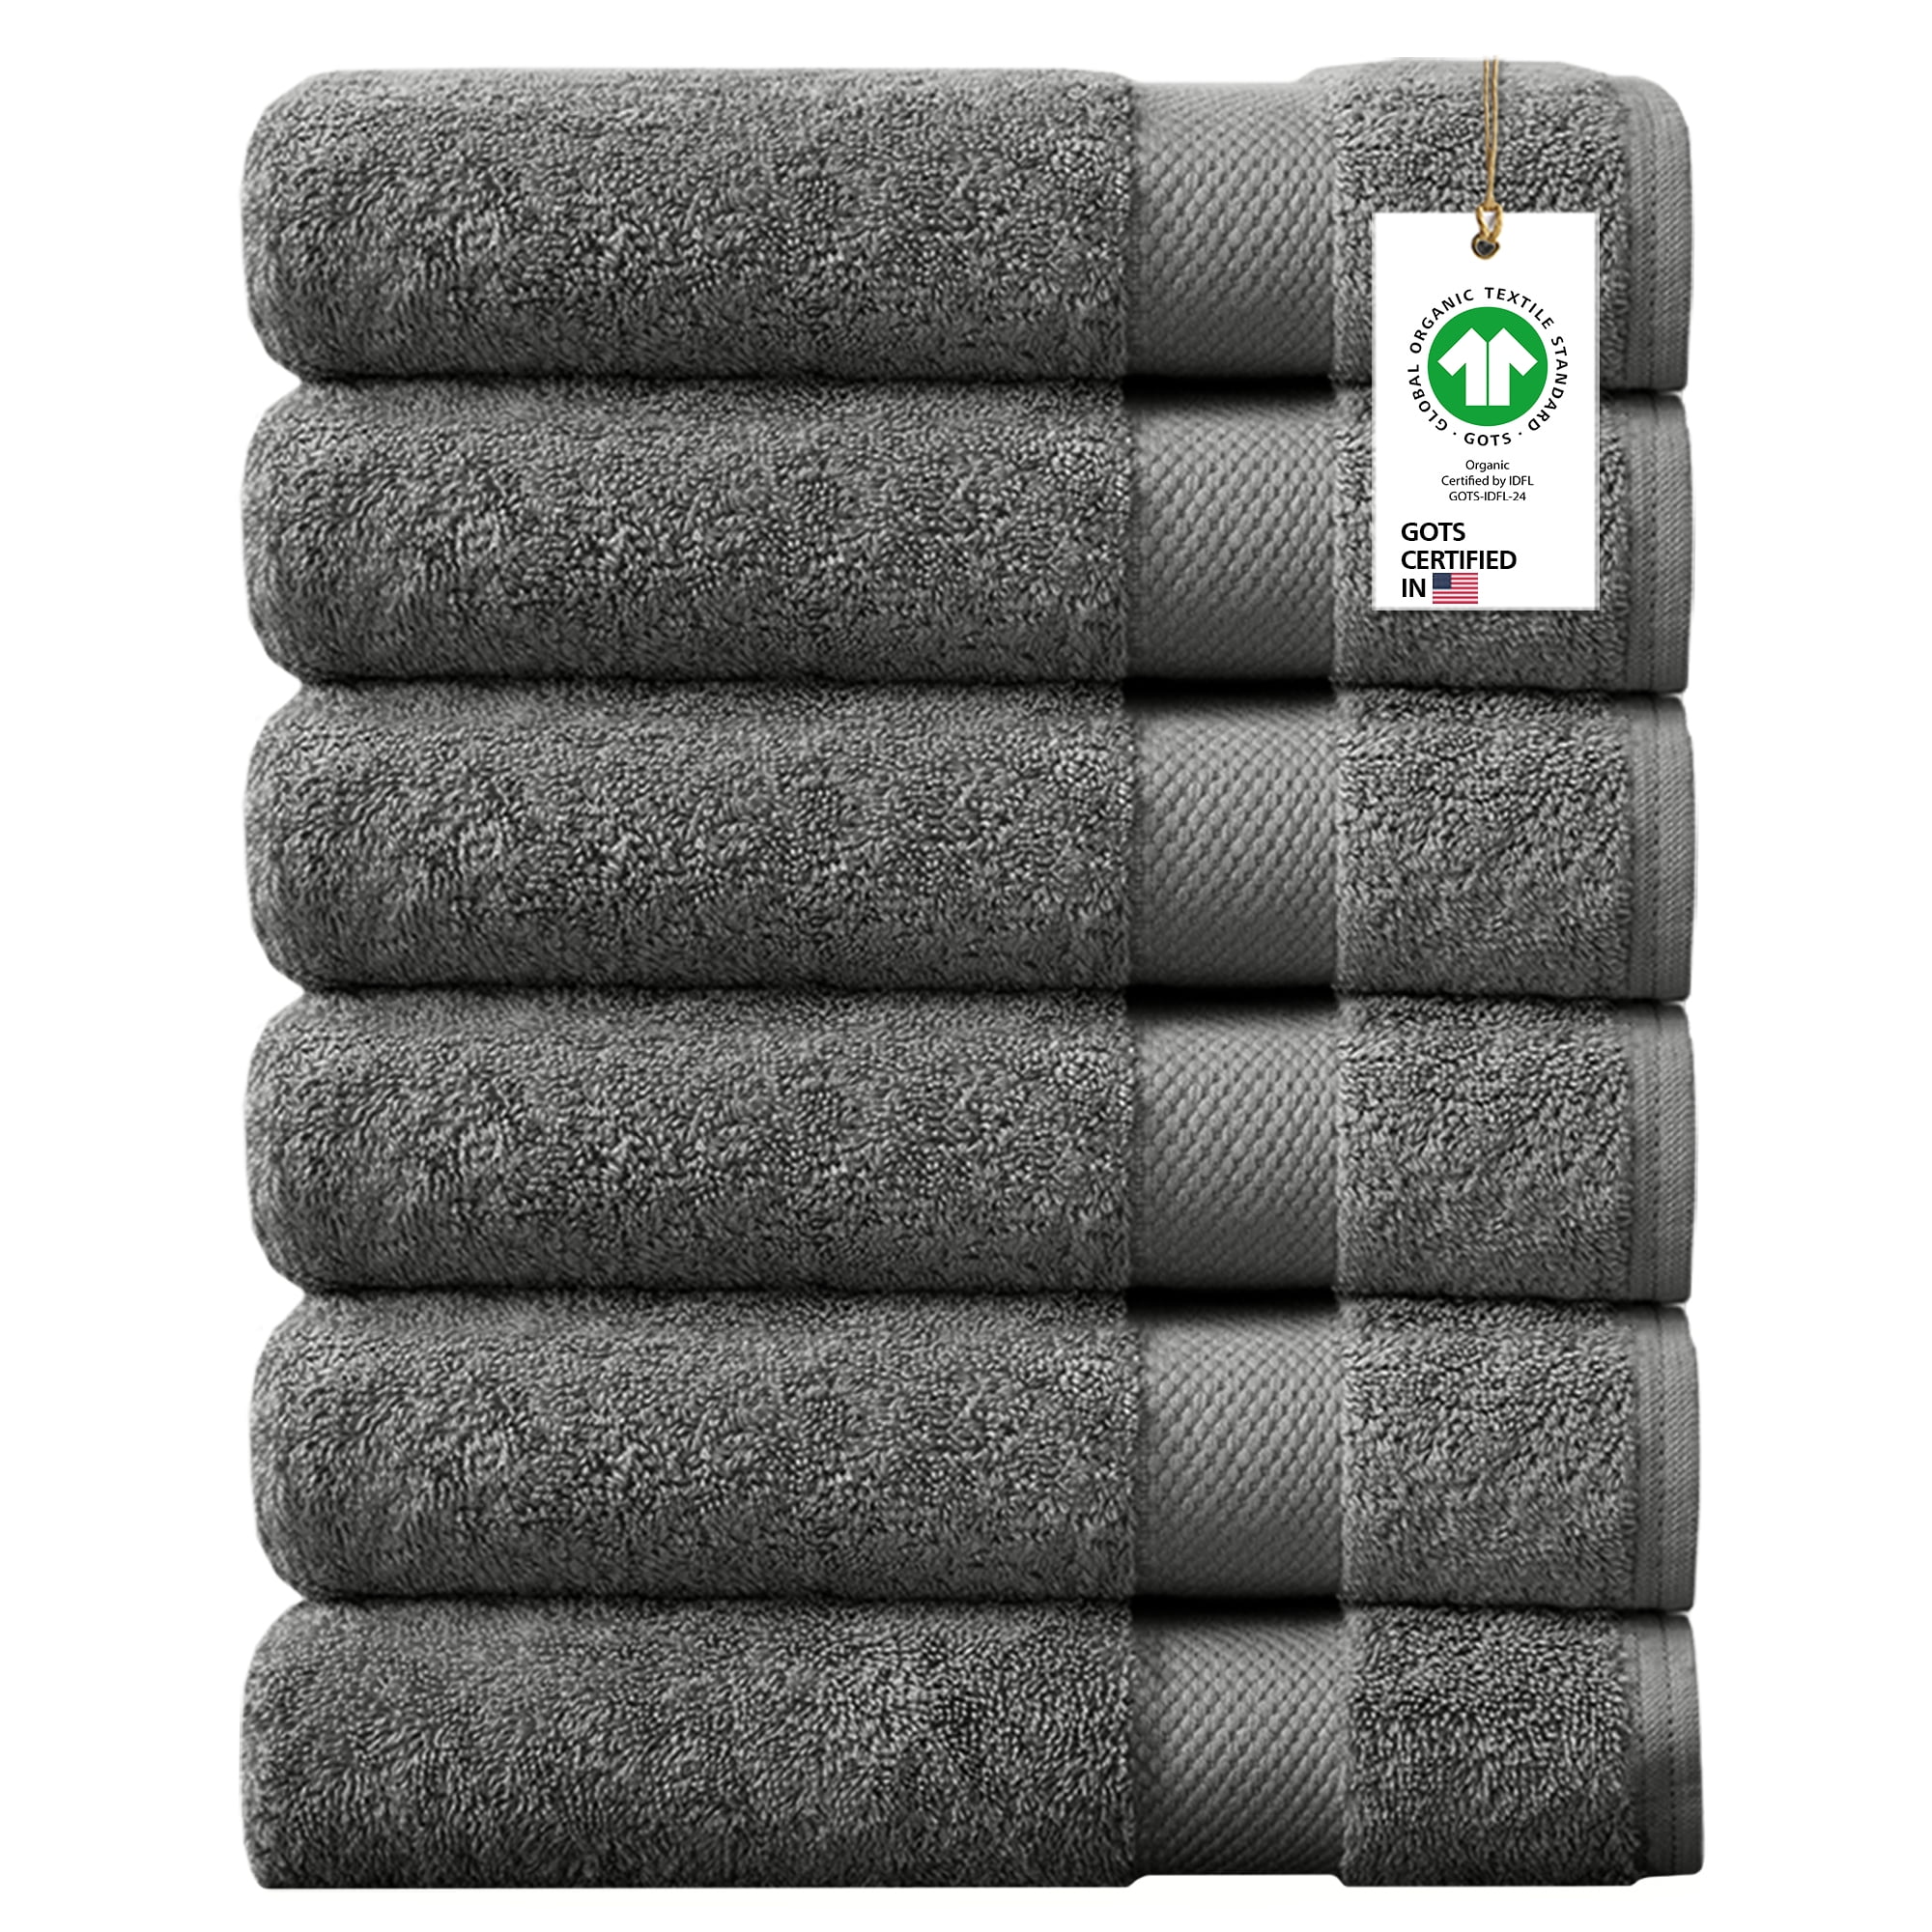 Naturally Organic Cotton Towels – Cotton Clouds Inc.